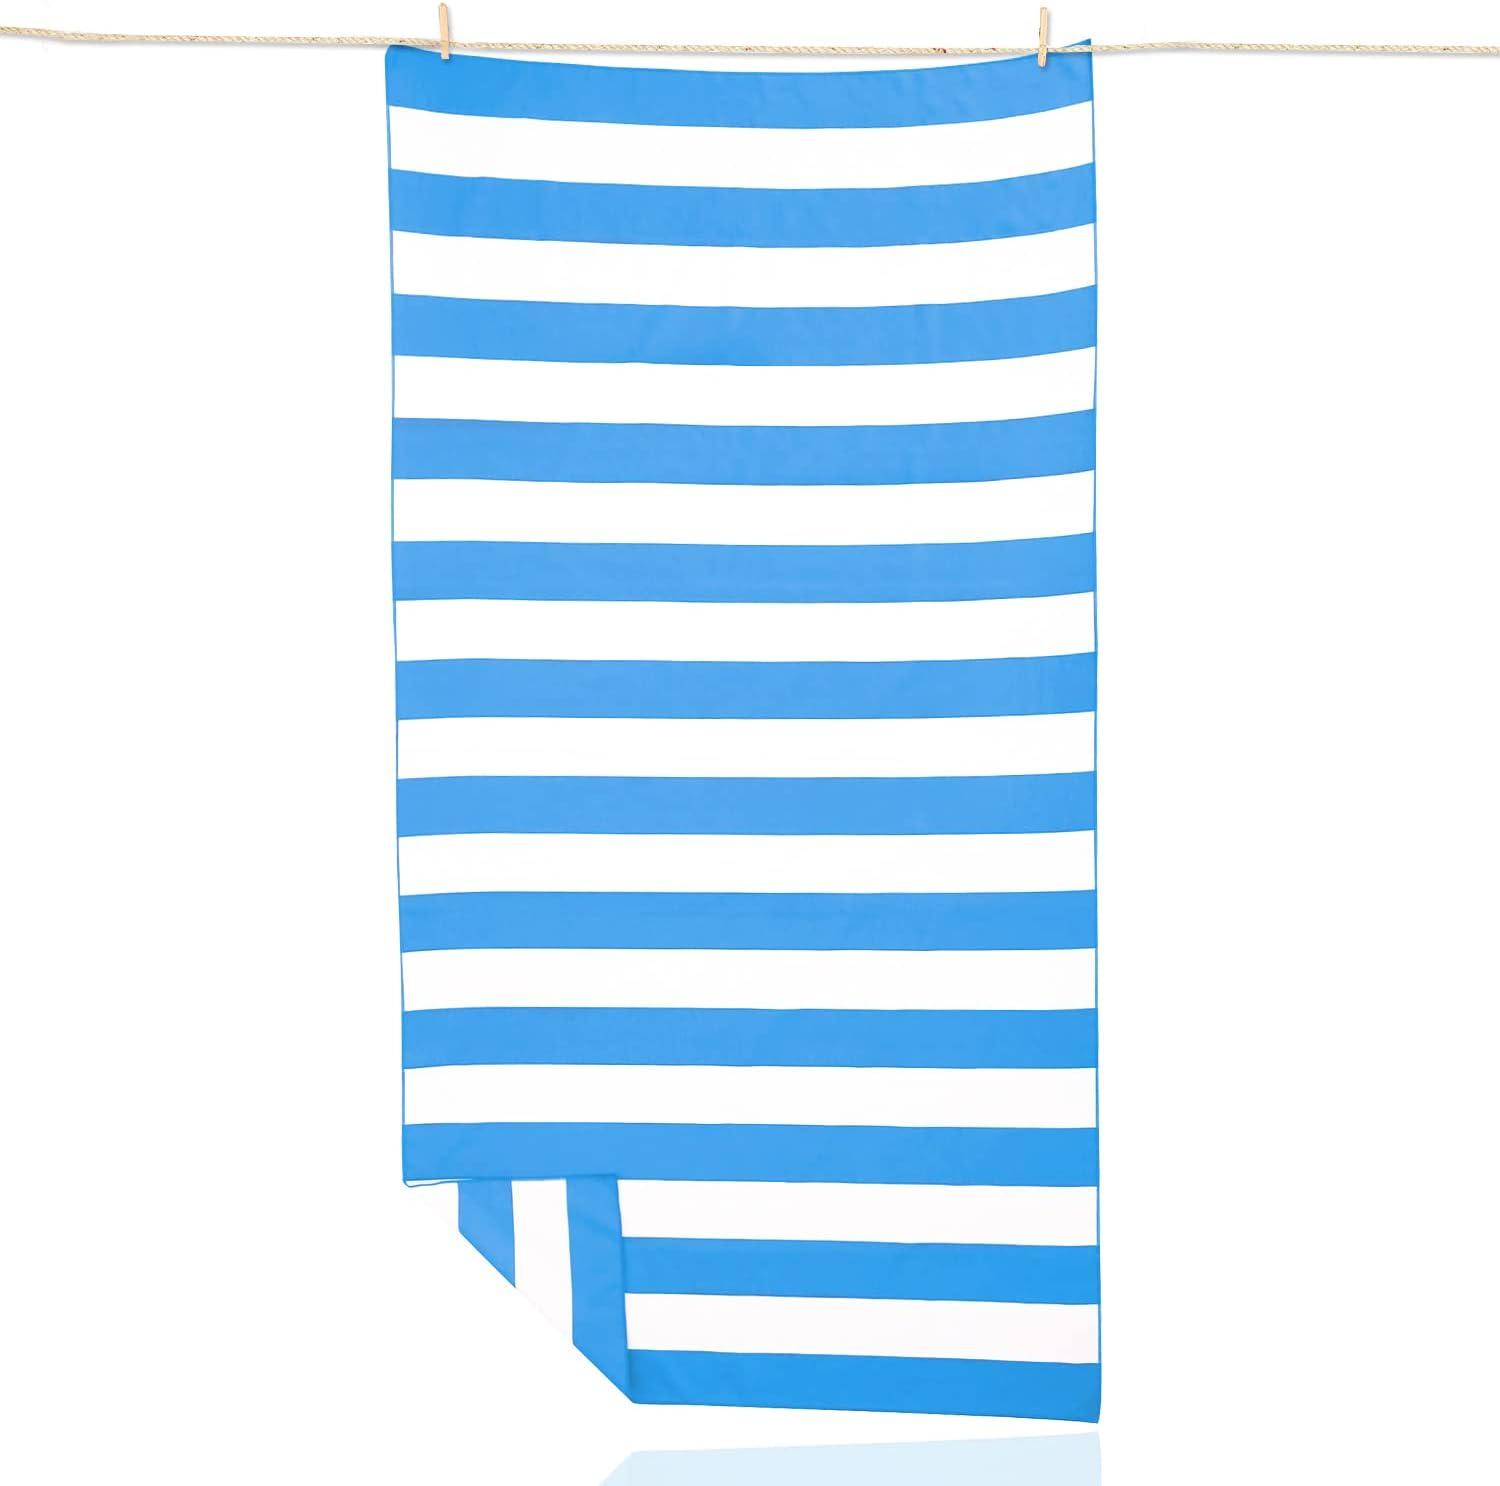 Your Choice Microfiber Beach Towel Set, Sand Free Beach Towel, Quick Dry Beach  Towel, Extra Large Beach Towels for Adults (67X35 Inch, 60X30 Inch), Travel  Towel - China Printed Microfiber Beach Towel